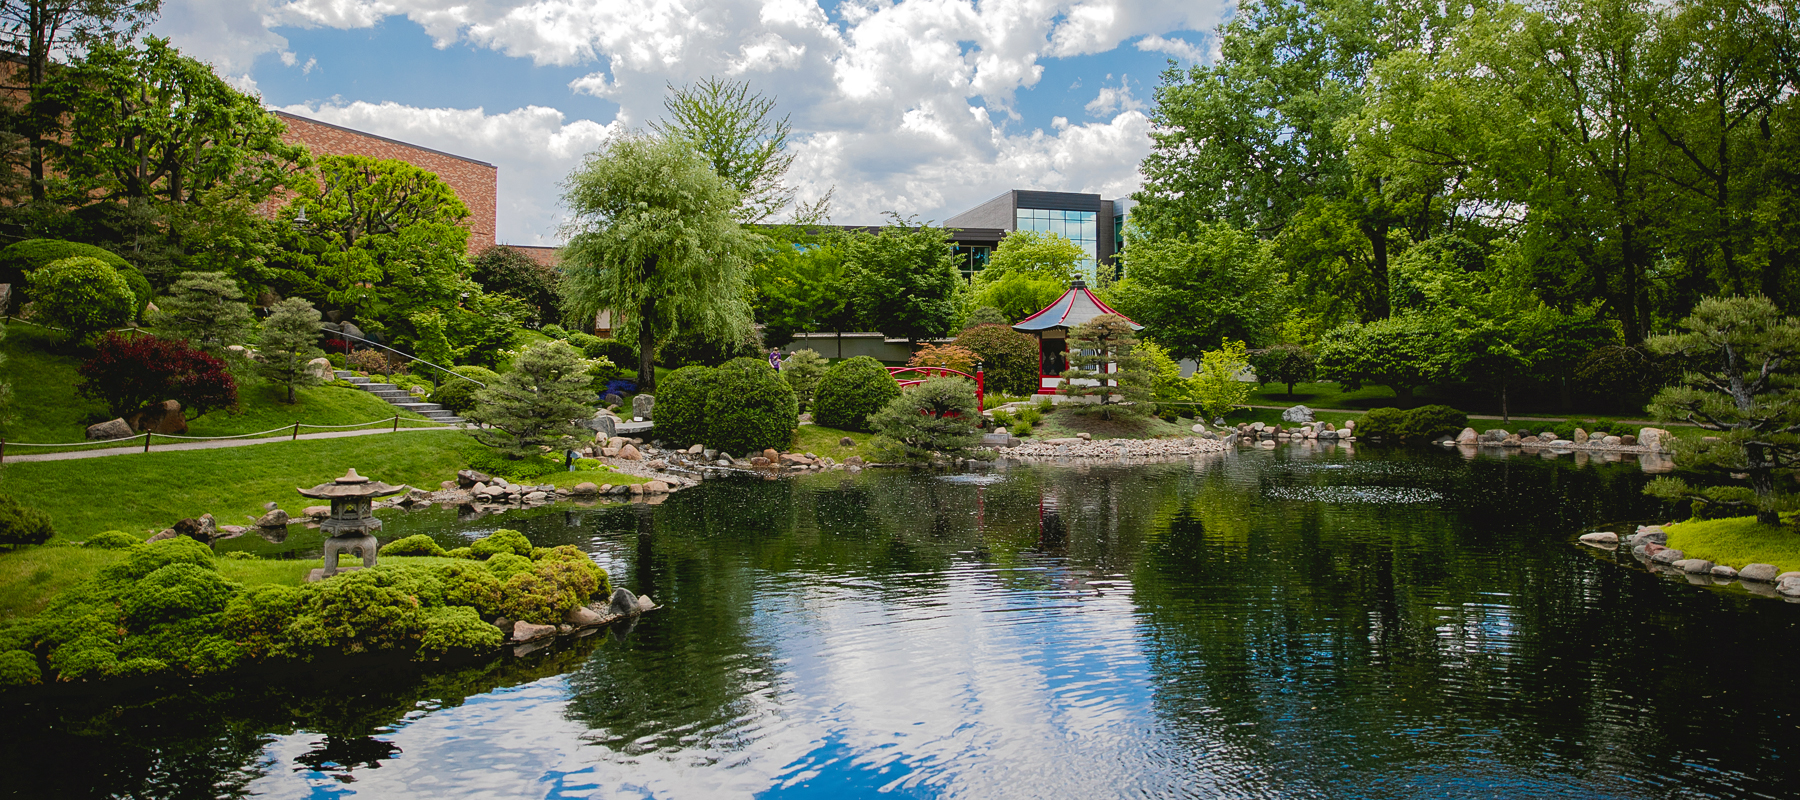 The world-class Japanese Garden on the grounds of Normandale  Community College.